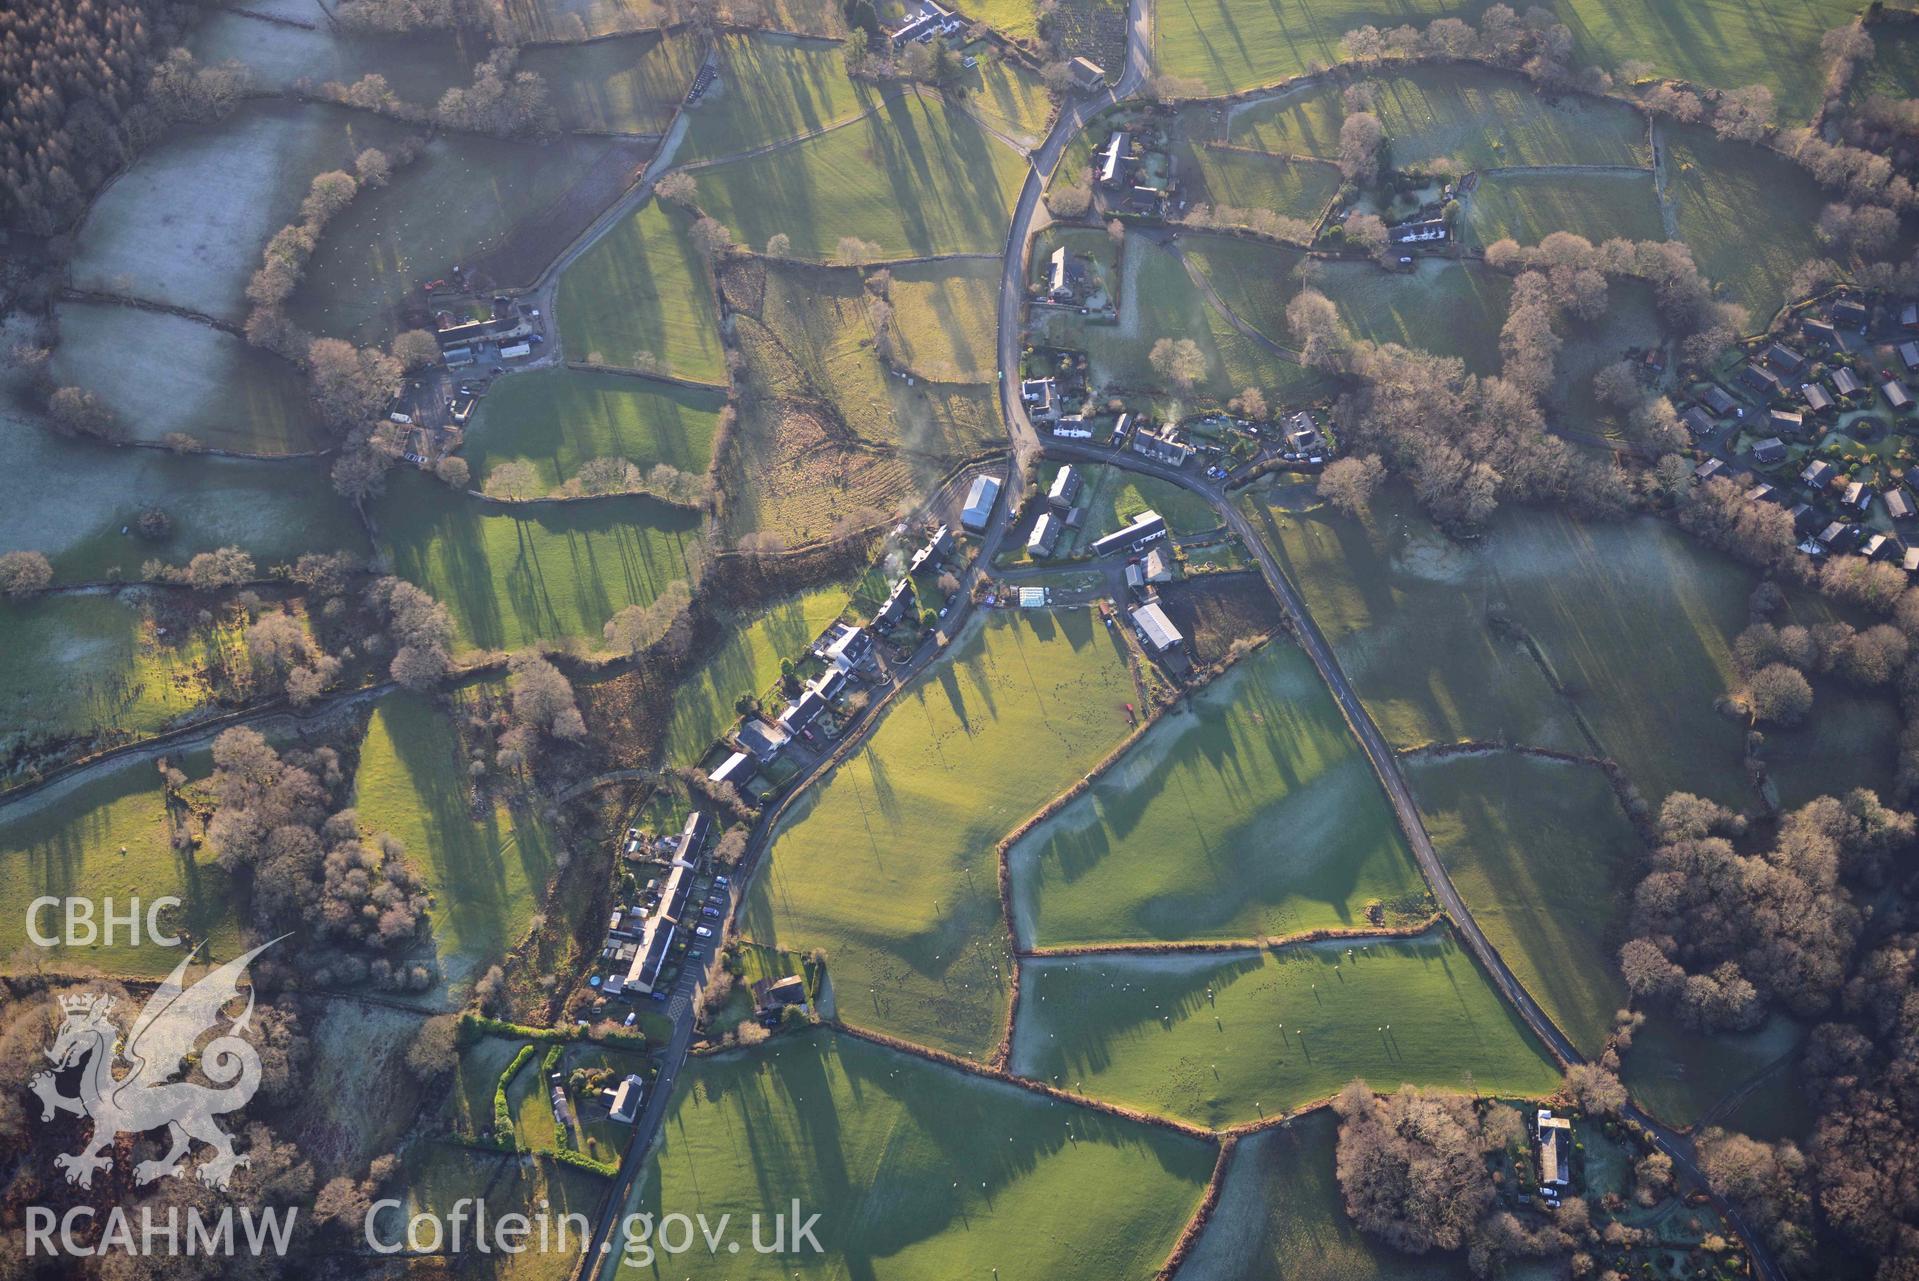 Oblique aerial photograph of Brithdir Roman fort in winter light. Taken during the Royal Commission’s programme of archaeological aerial reconnaissance by Toby Driver on 17th January 2022